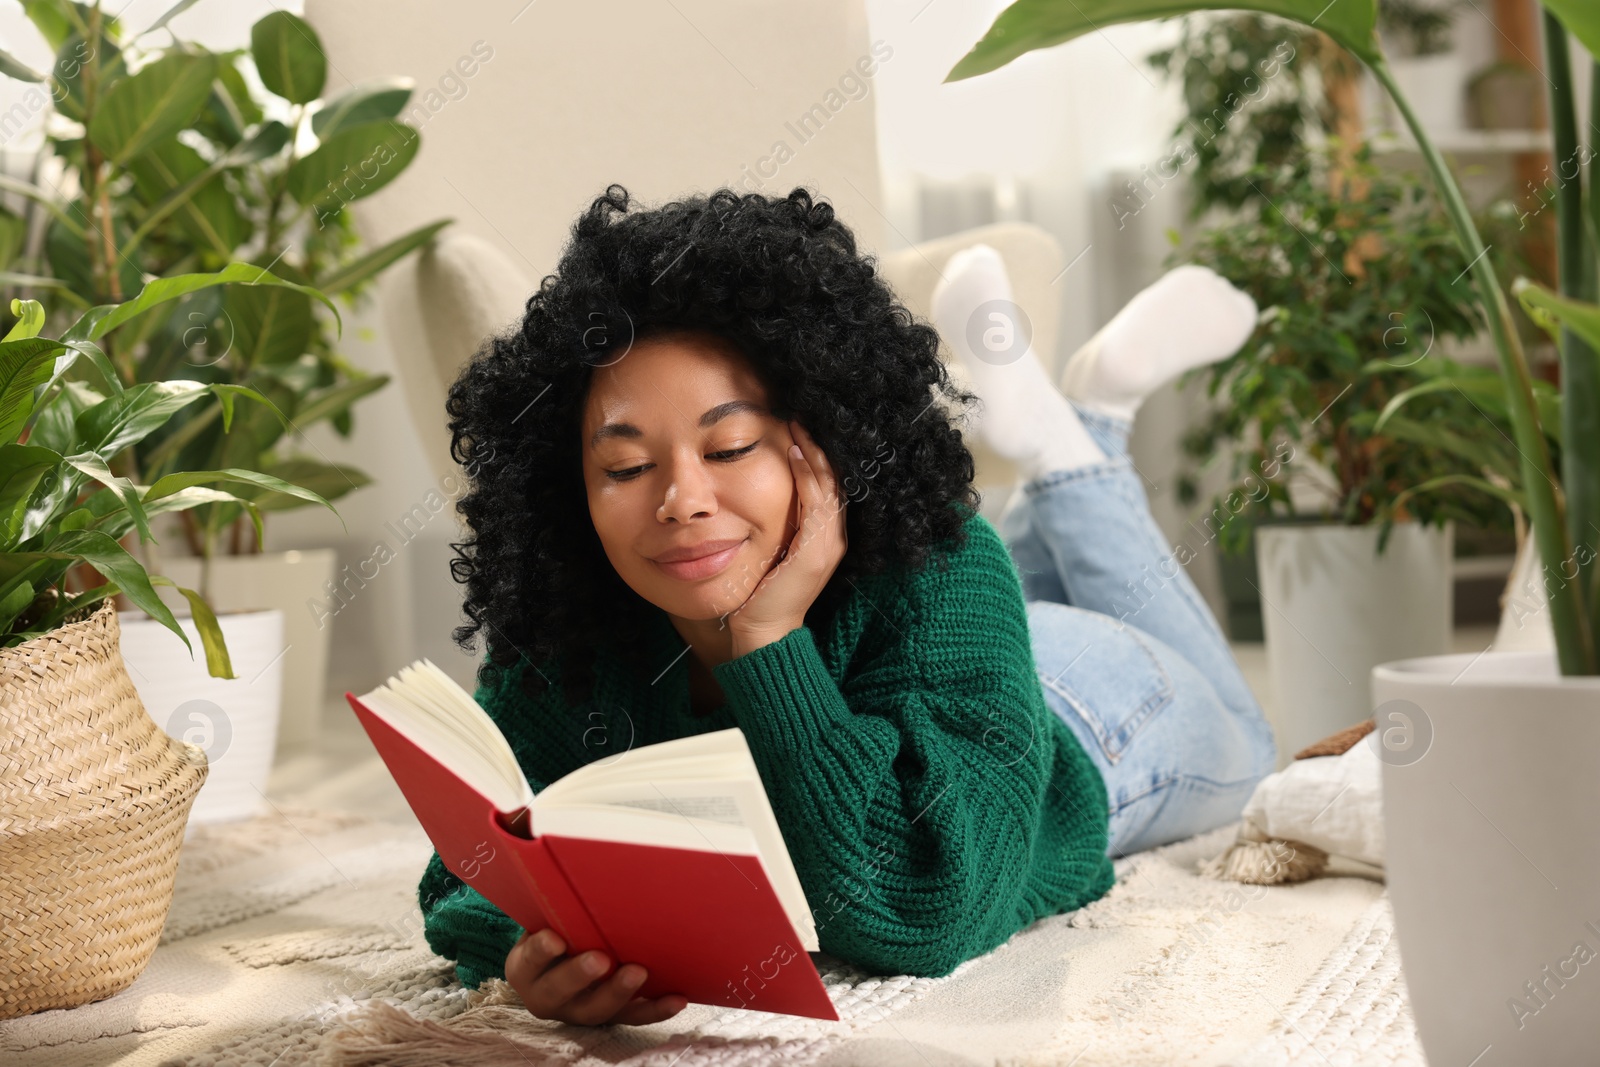 Photo of Relaxing atmosphere. Woman reading book surrounded by potted houseplants at home